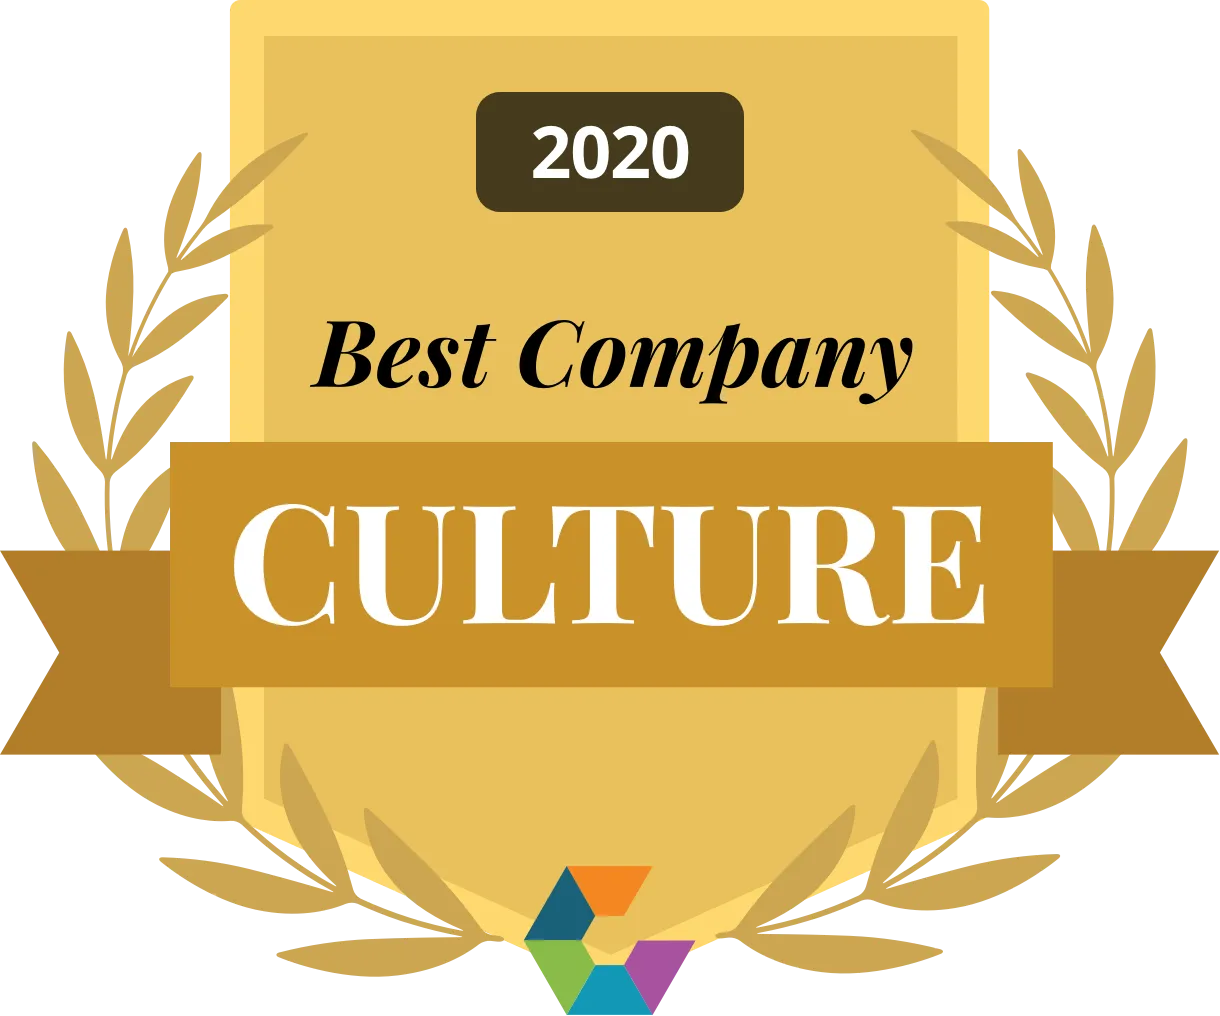 Comparably - Best Company Culture 2020